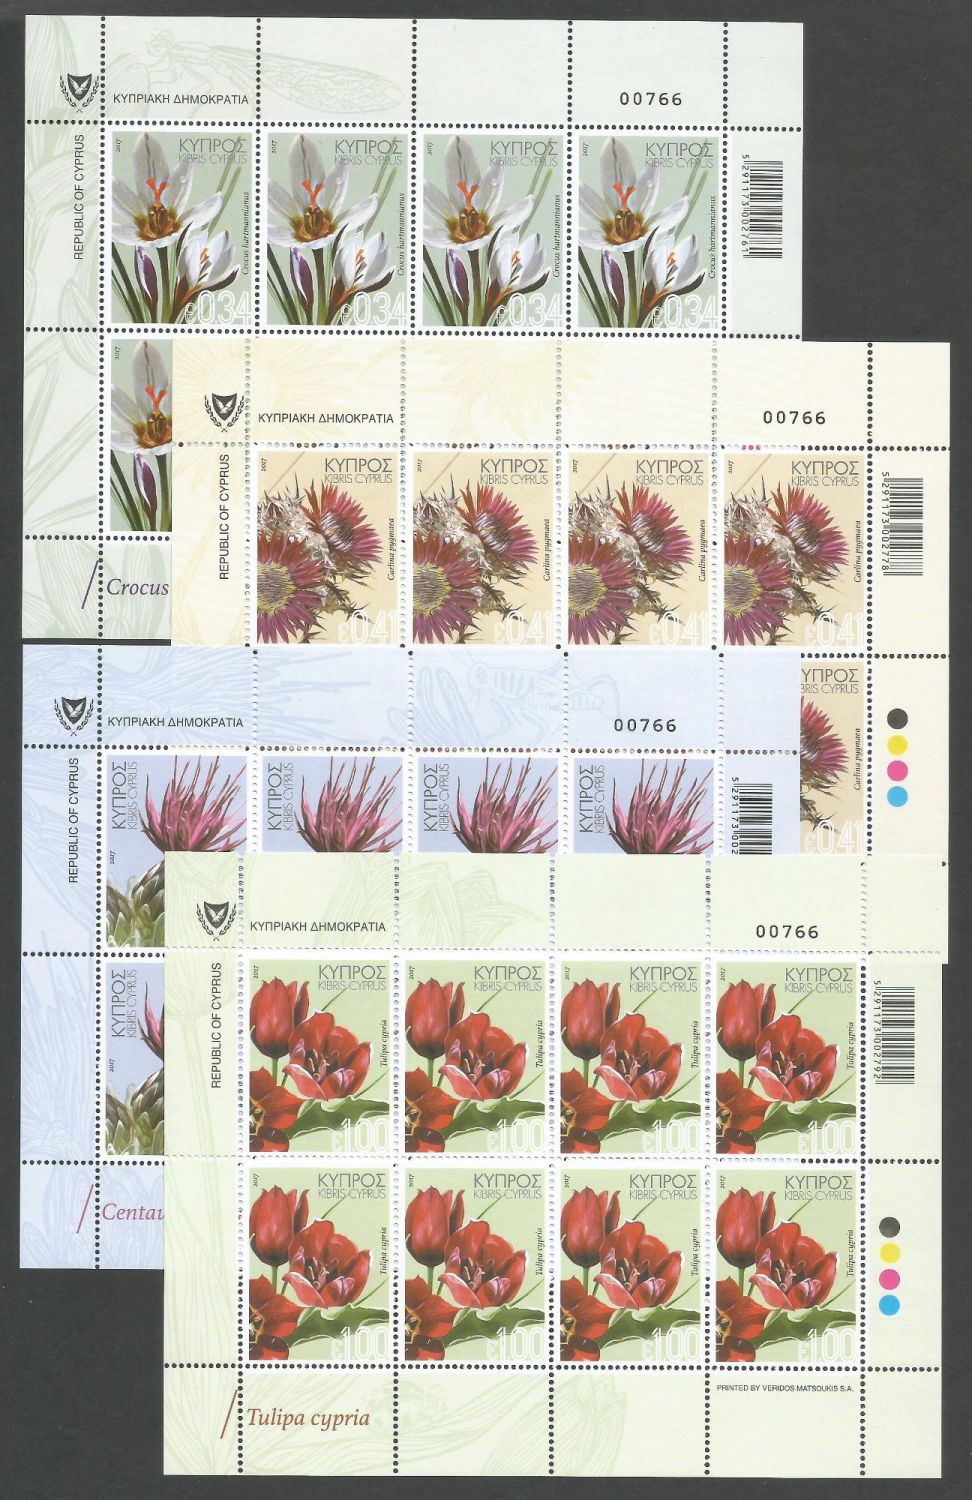 Cyprus Stamps SG 2017 (a) Wild Flowers - Full Sheet MINT 